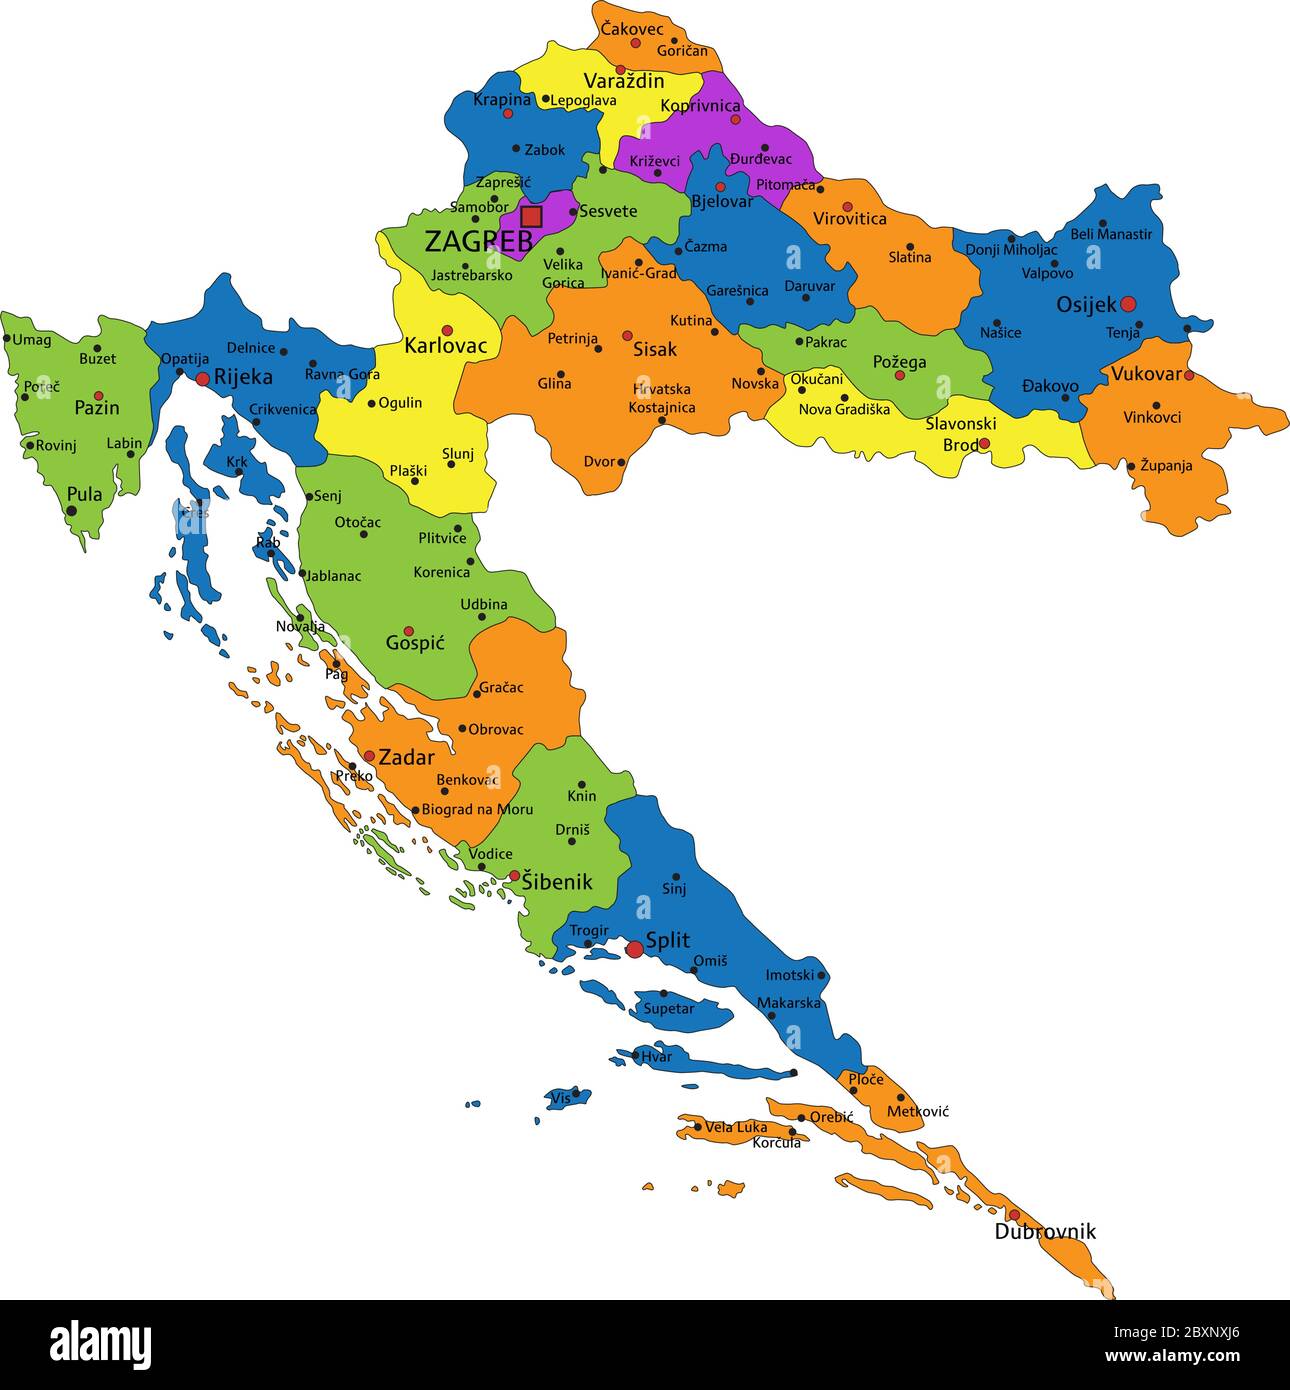 Map of croatia hi-res stock photography images - Alamy